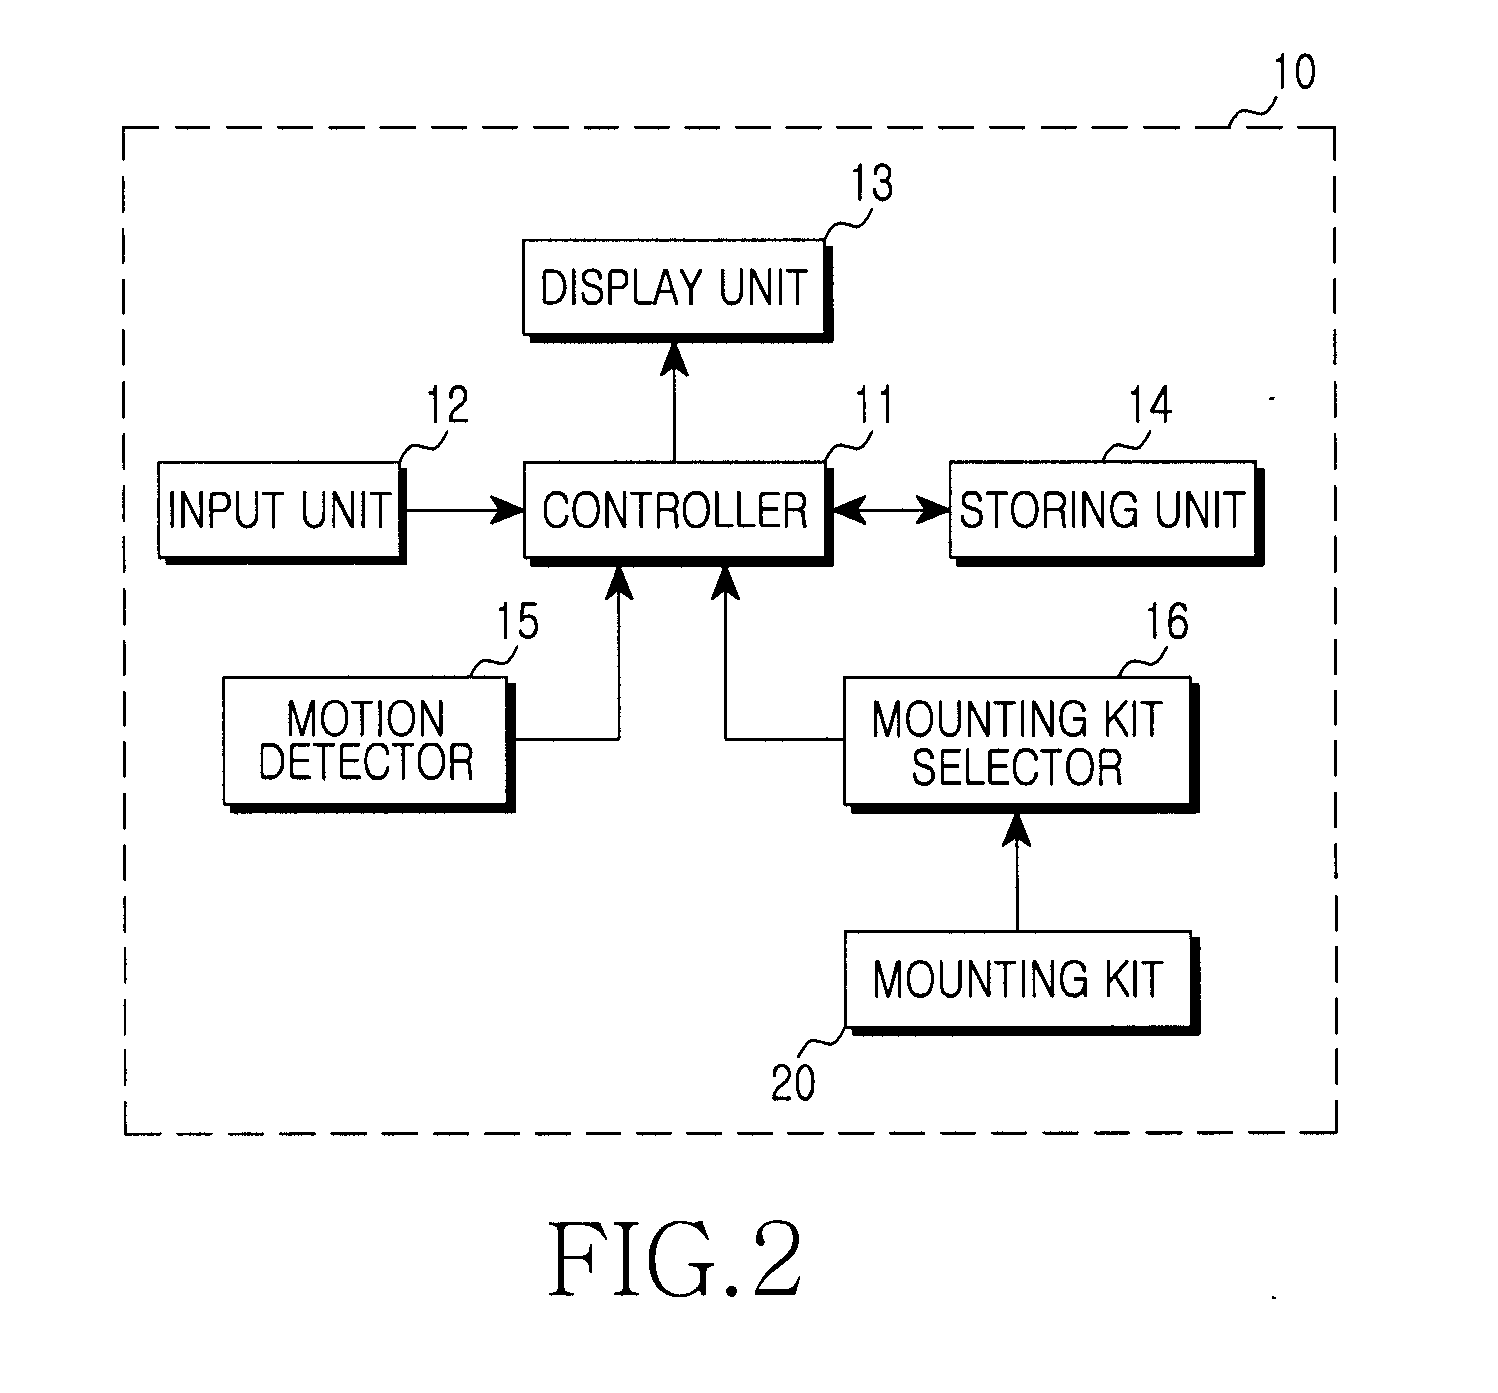 Assembly and the operating method for exercise amount measuring